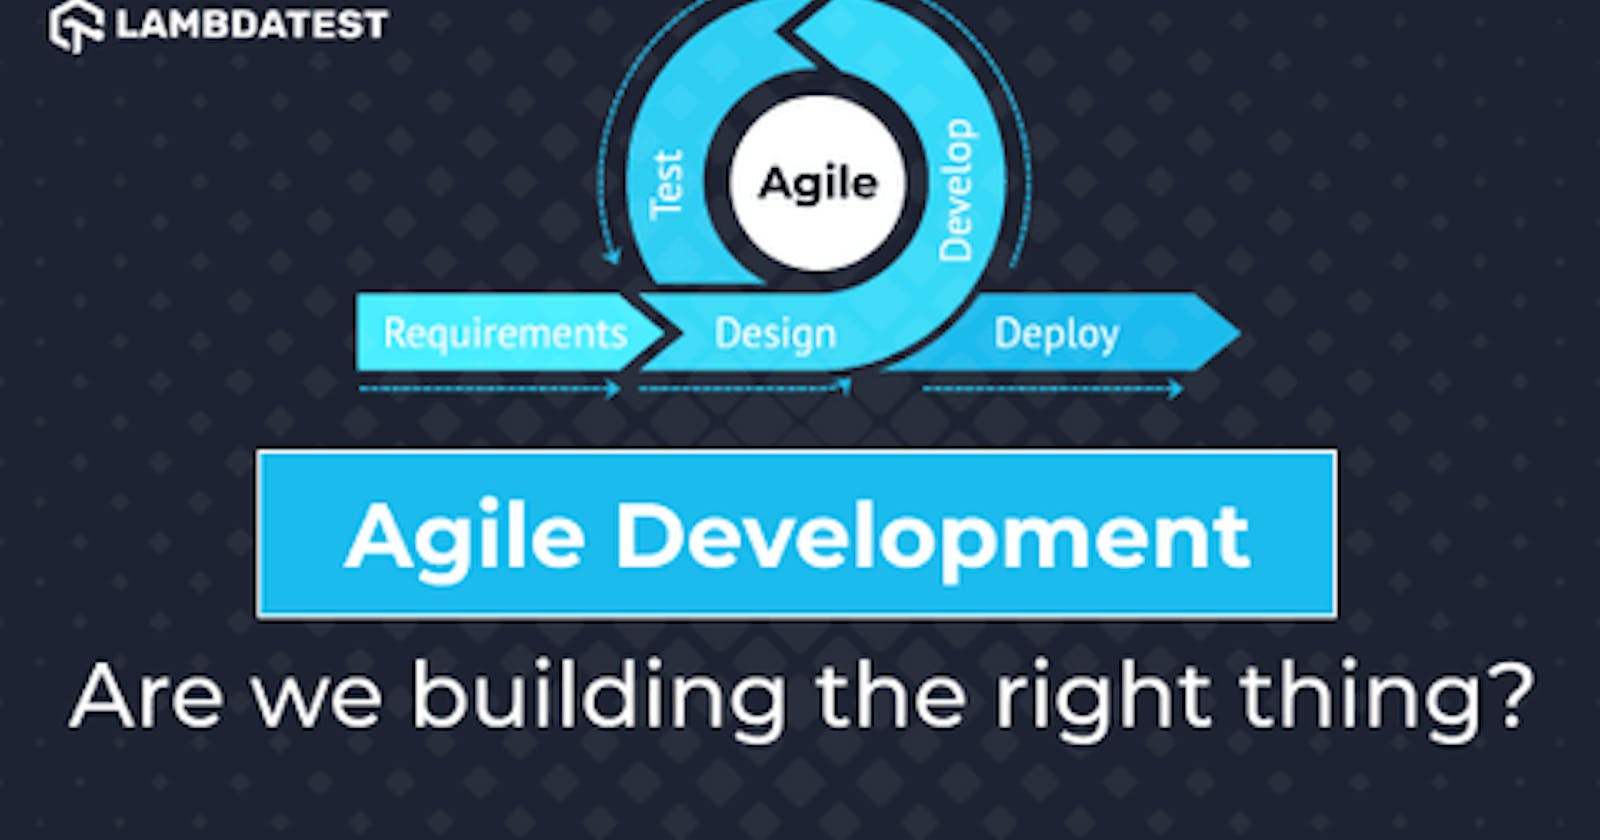 Agile Development — Are we building the right thing?